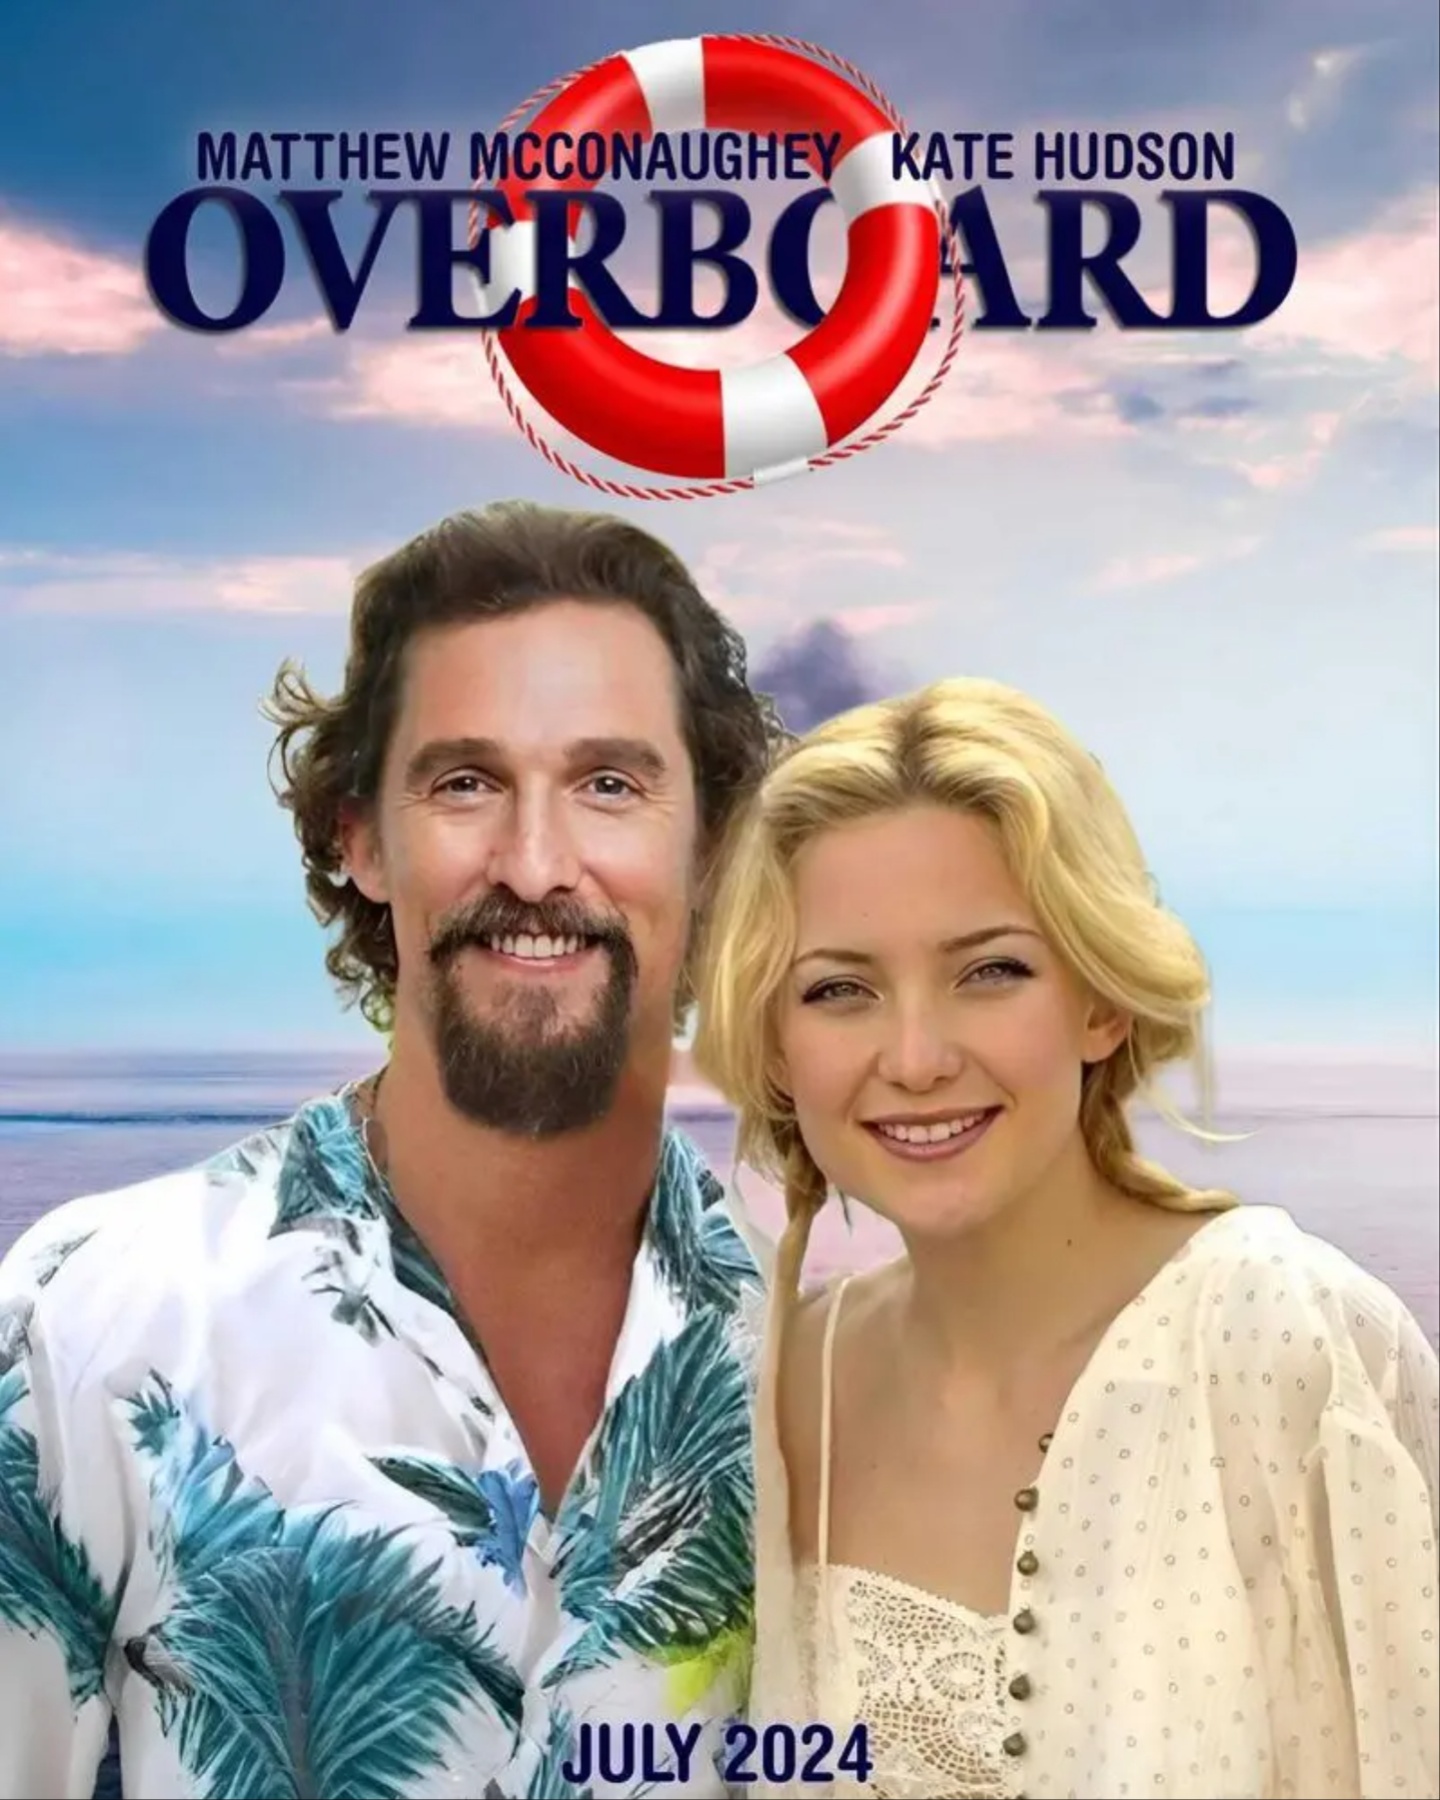 fake poster for 'overboard' starring Matthew McConaughey and Kate Hudson